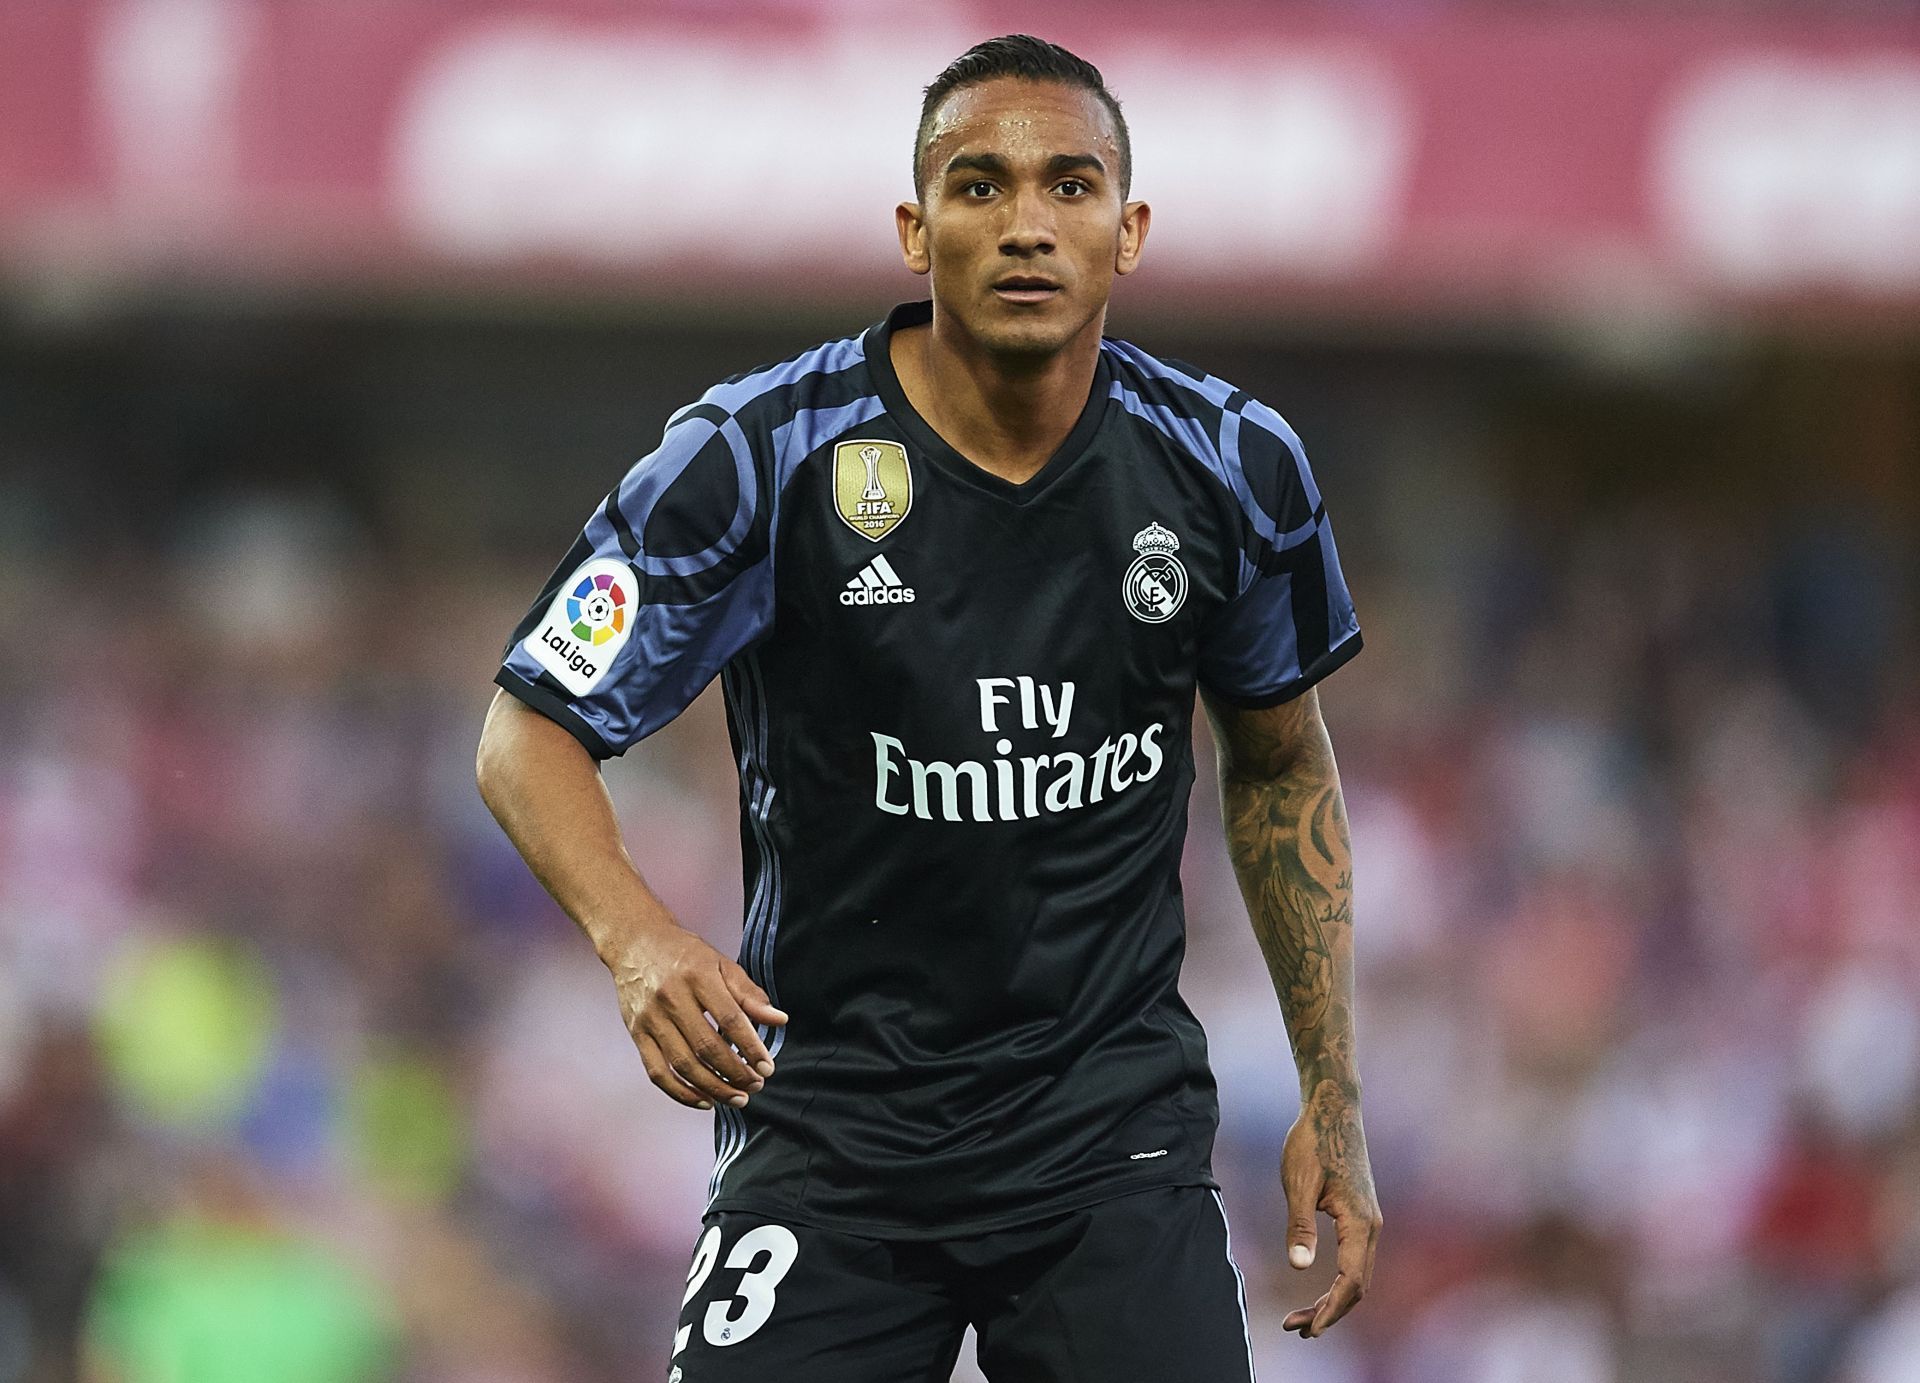 Danilo was a flop at Real Madrid